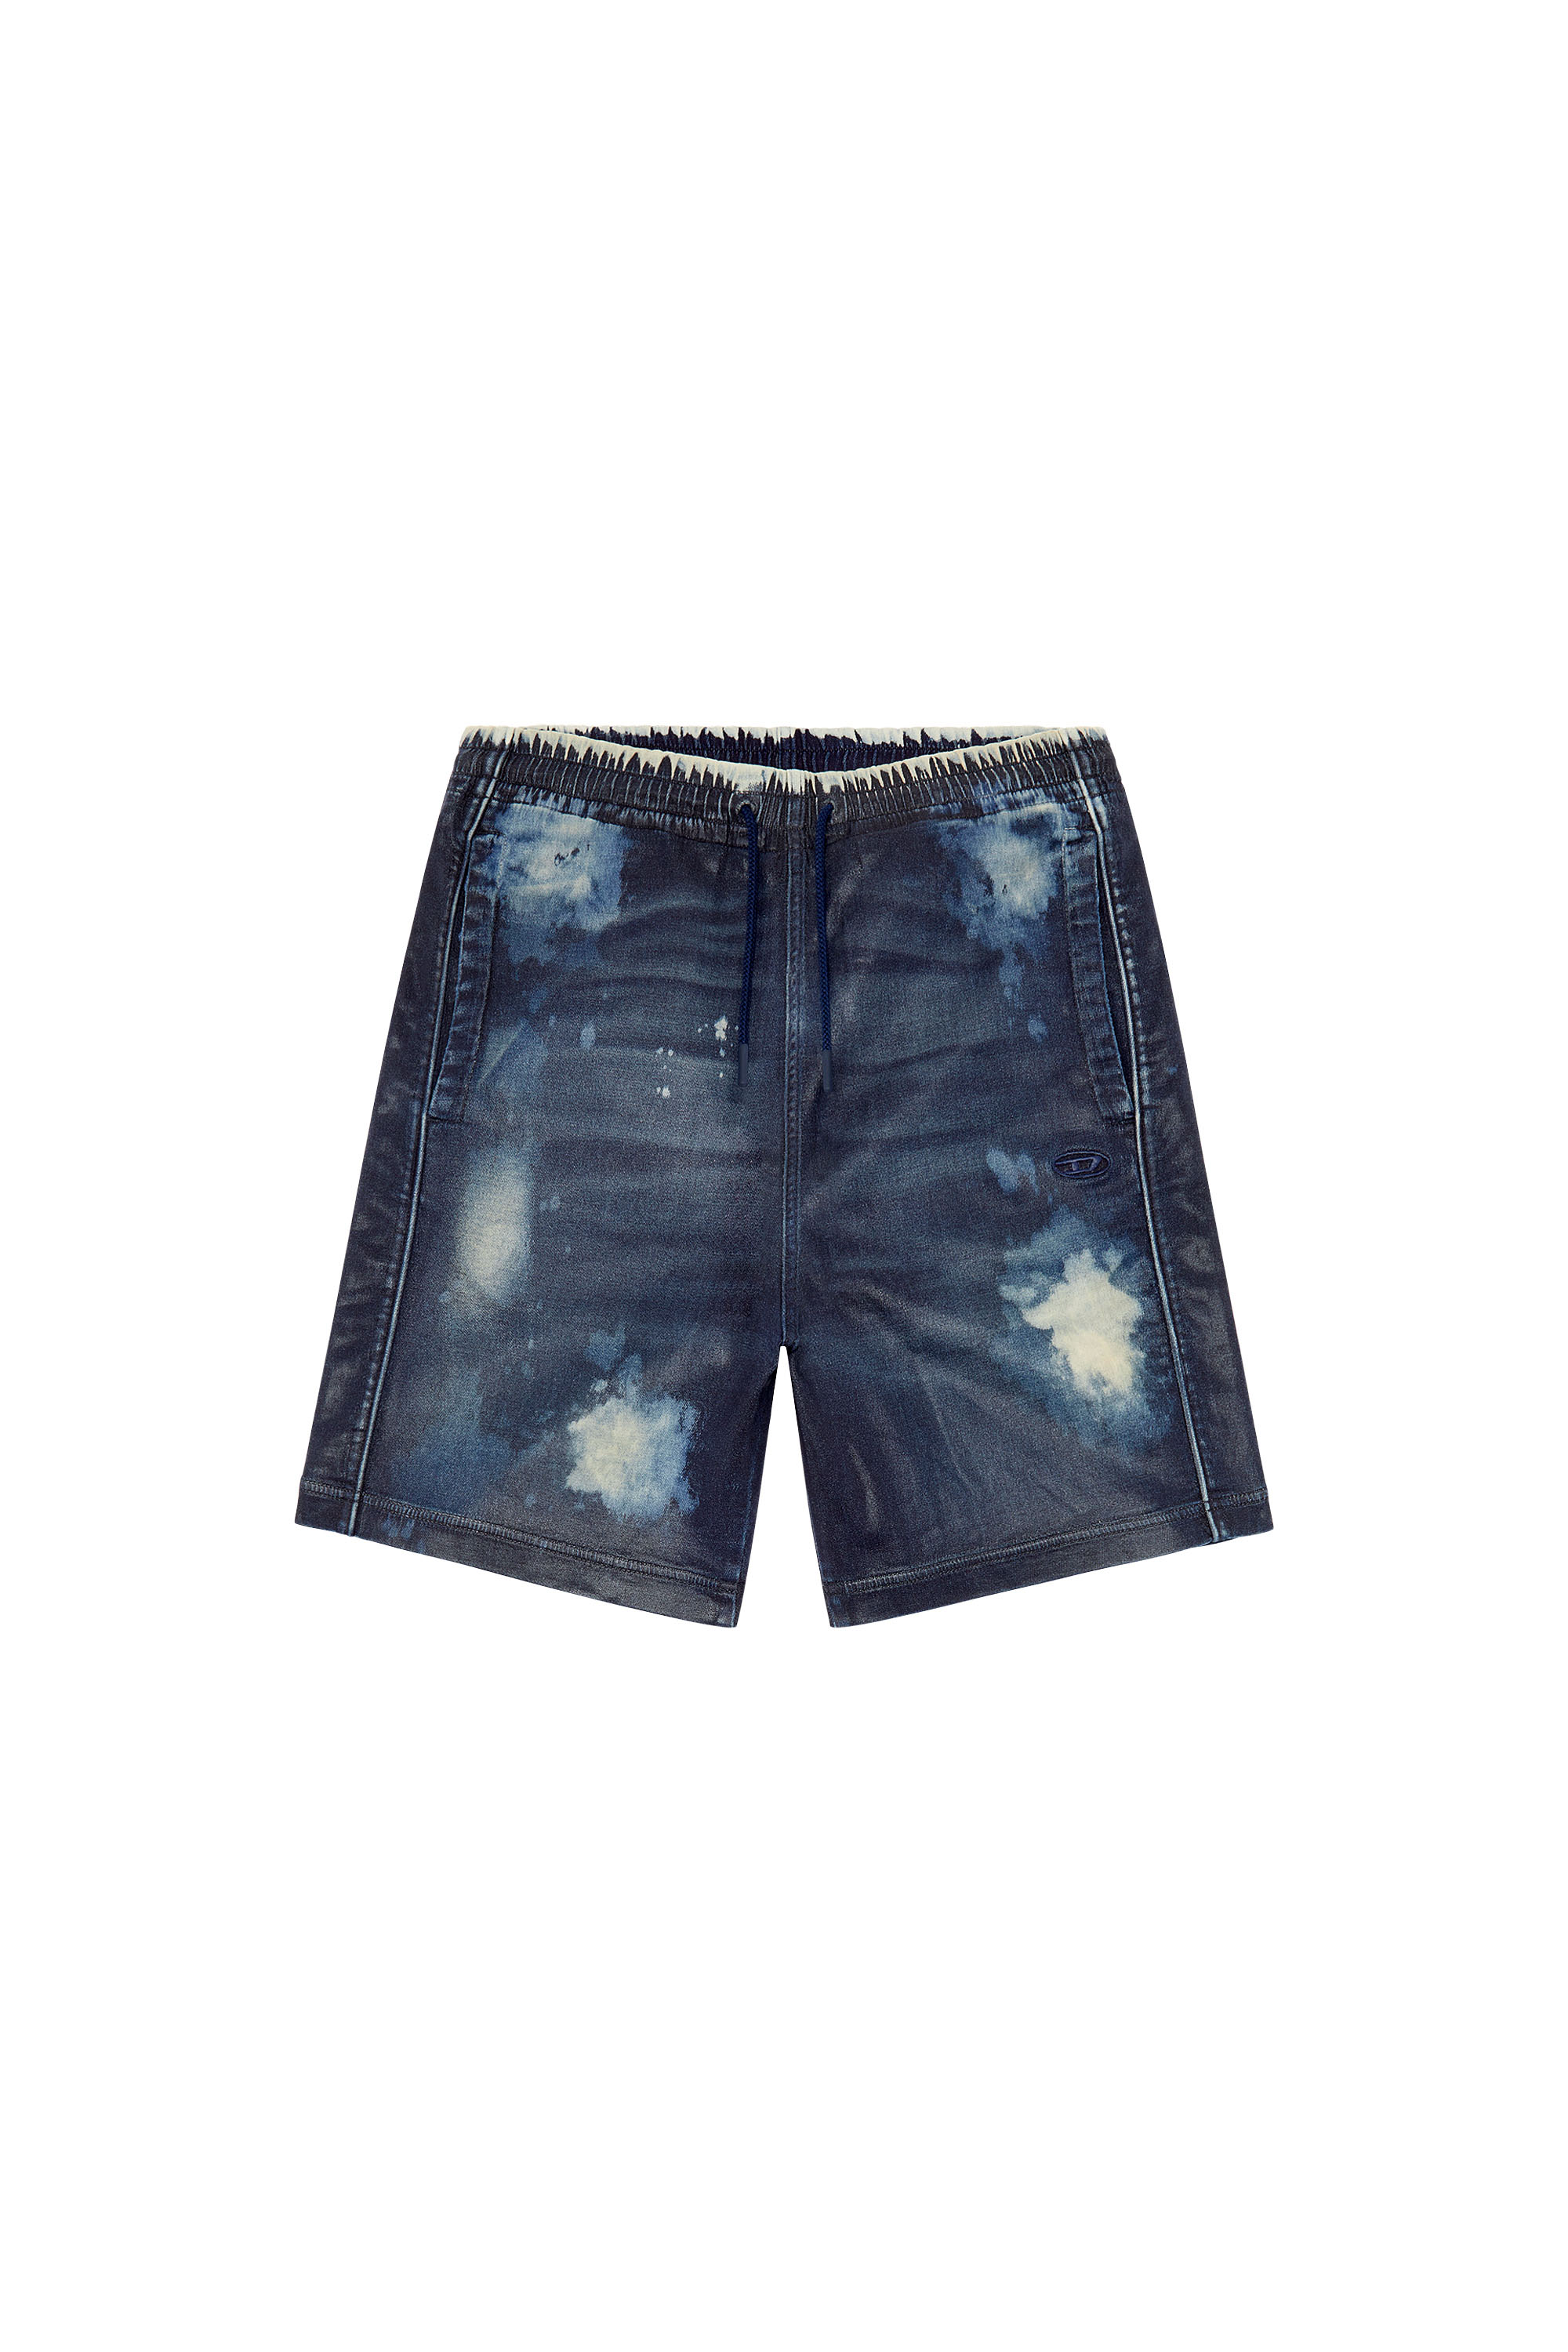 Diesel - D-BOXY-S TRACK, Man Shorts in coated Track Denim in Blue - Image 5